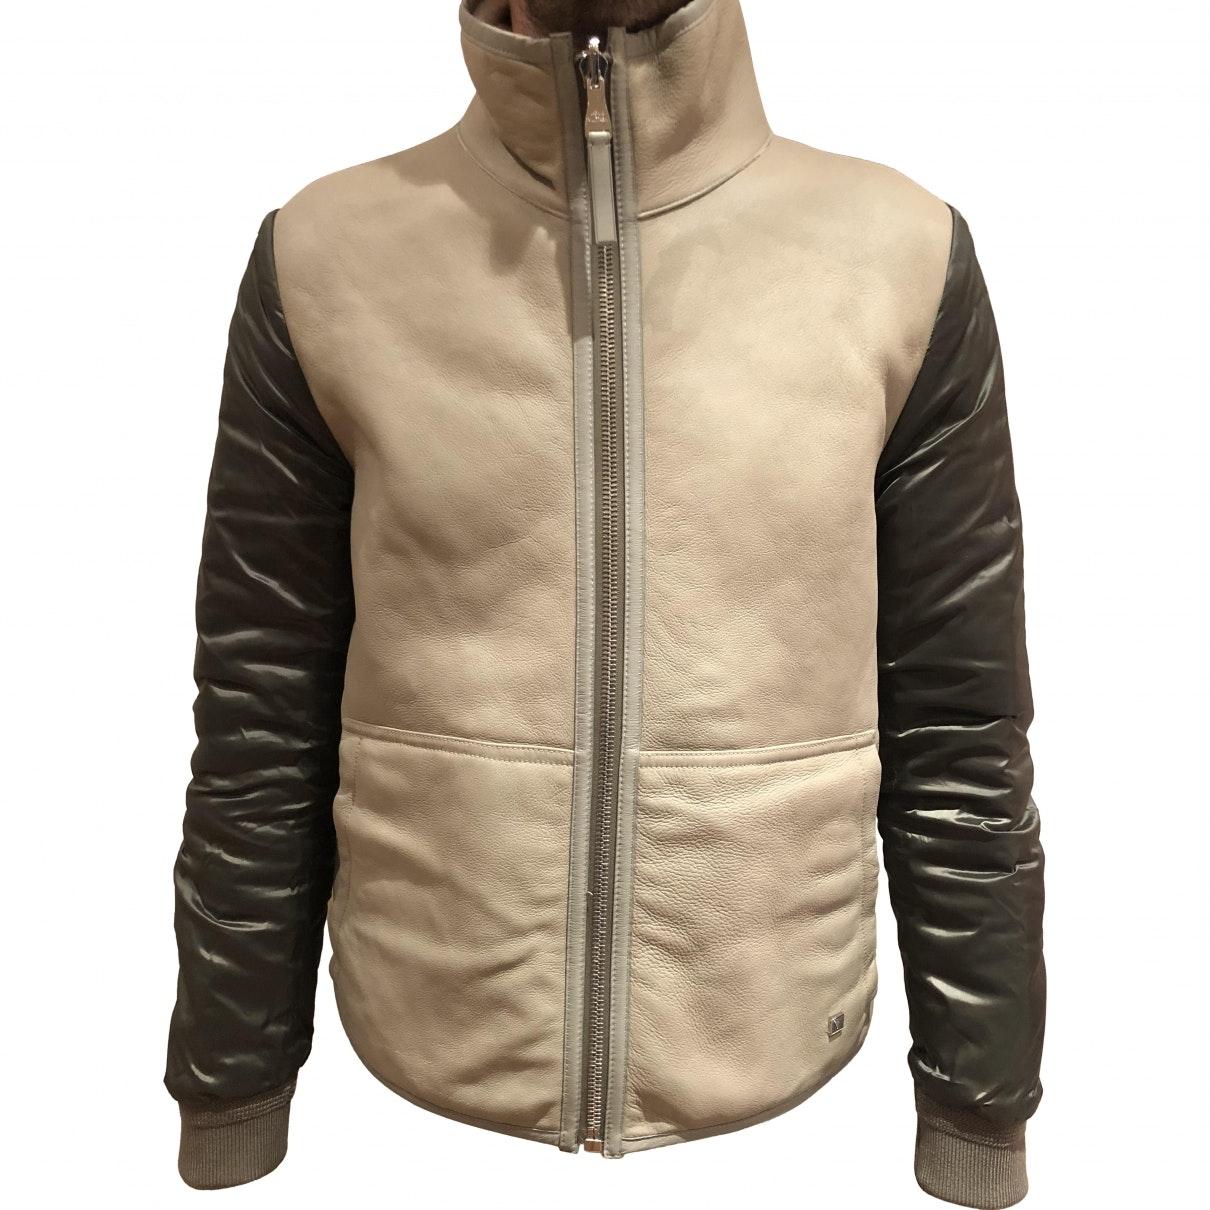 Louis Vuitton Leather Jacket in Beige (Natural) for Men - Lyst